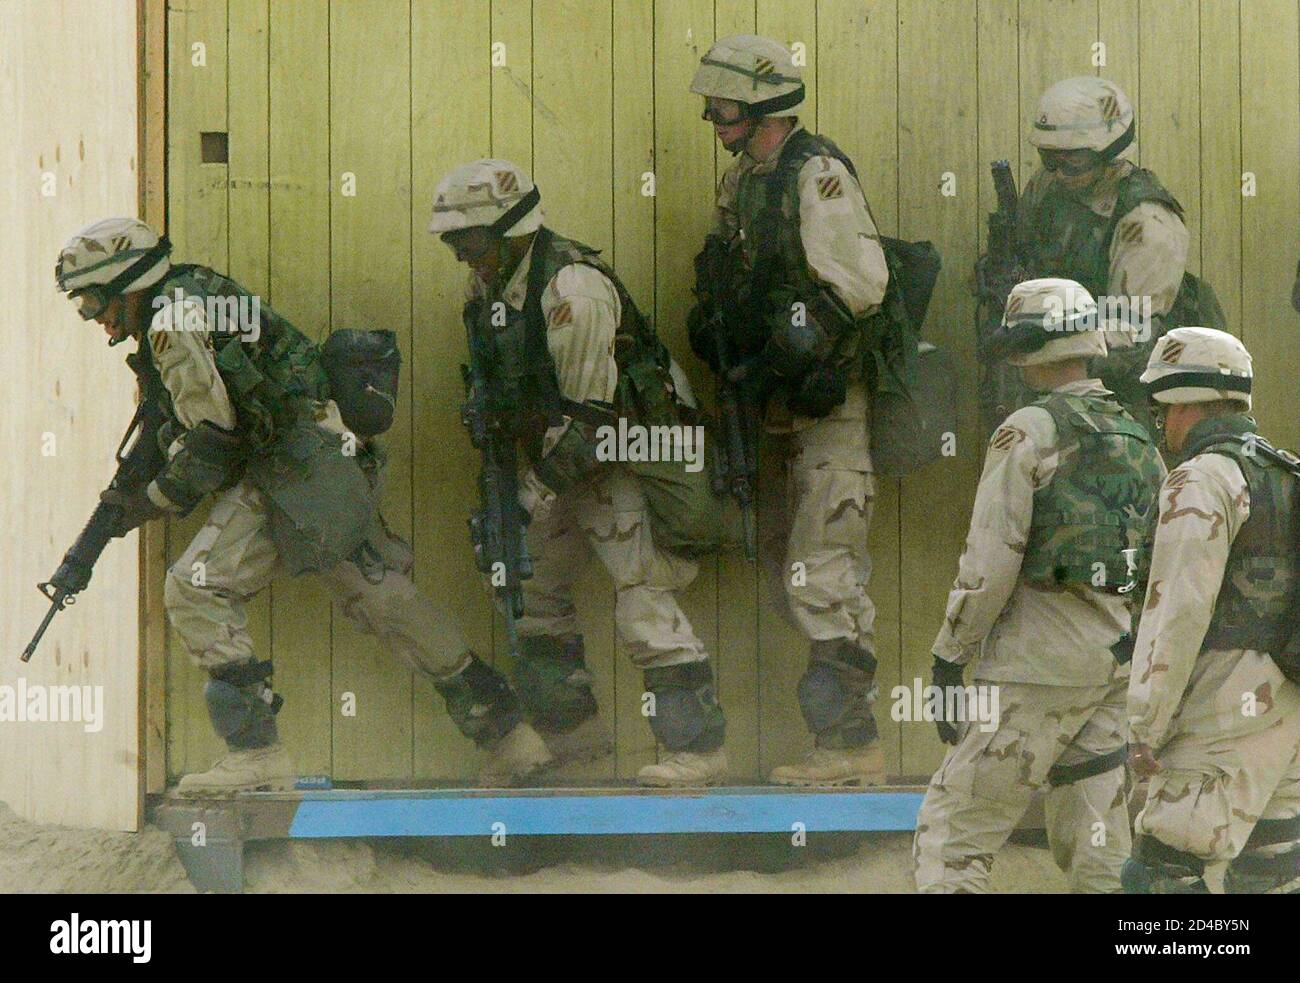 United States Army soldiers from Bravo Company, Task Force 315 of Fort Stewart, Georgia train in urban warfare at a camp in the north Kuwait desert January 15, 2003. REUTERS/Chris Helgren  CLH/GB Stock Photo